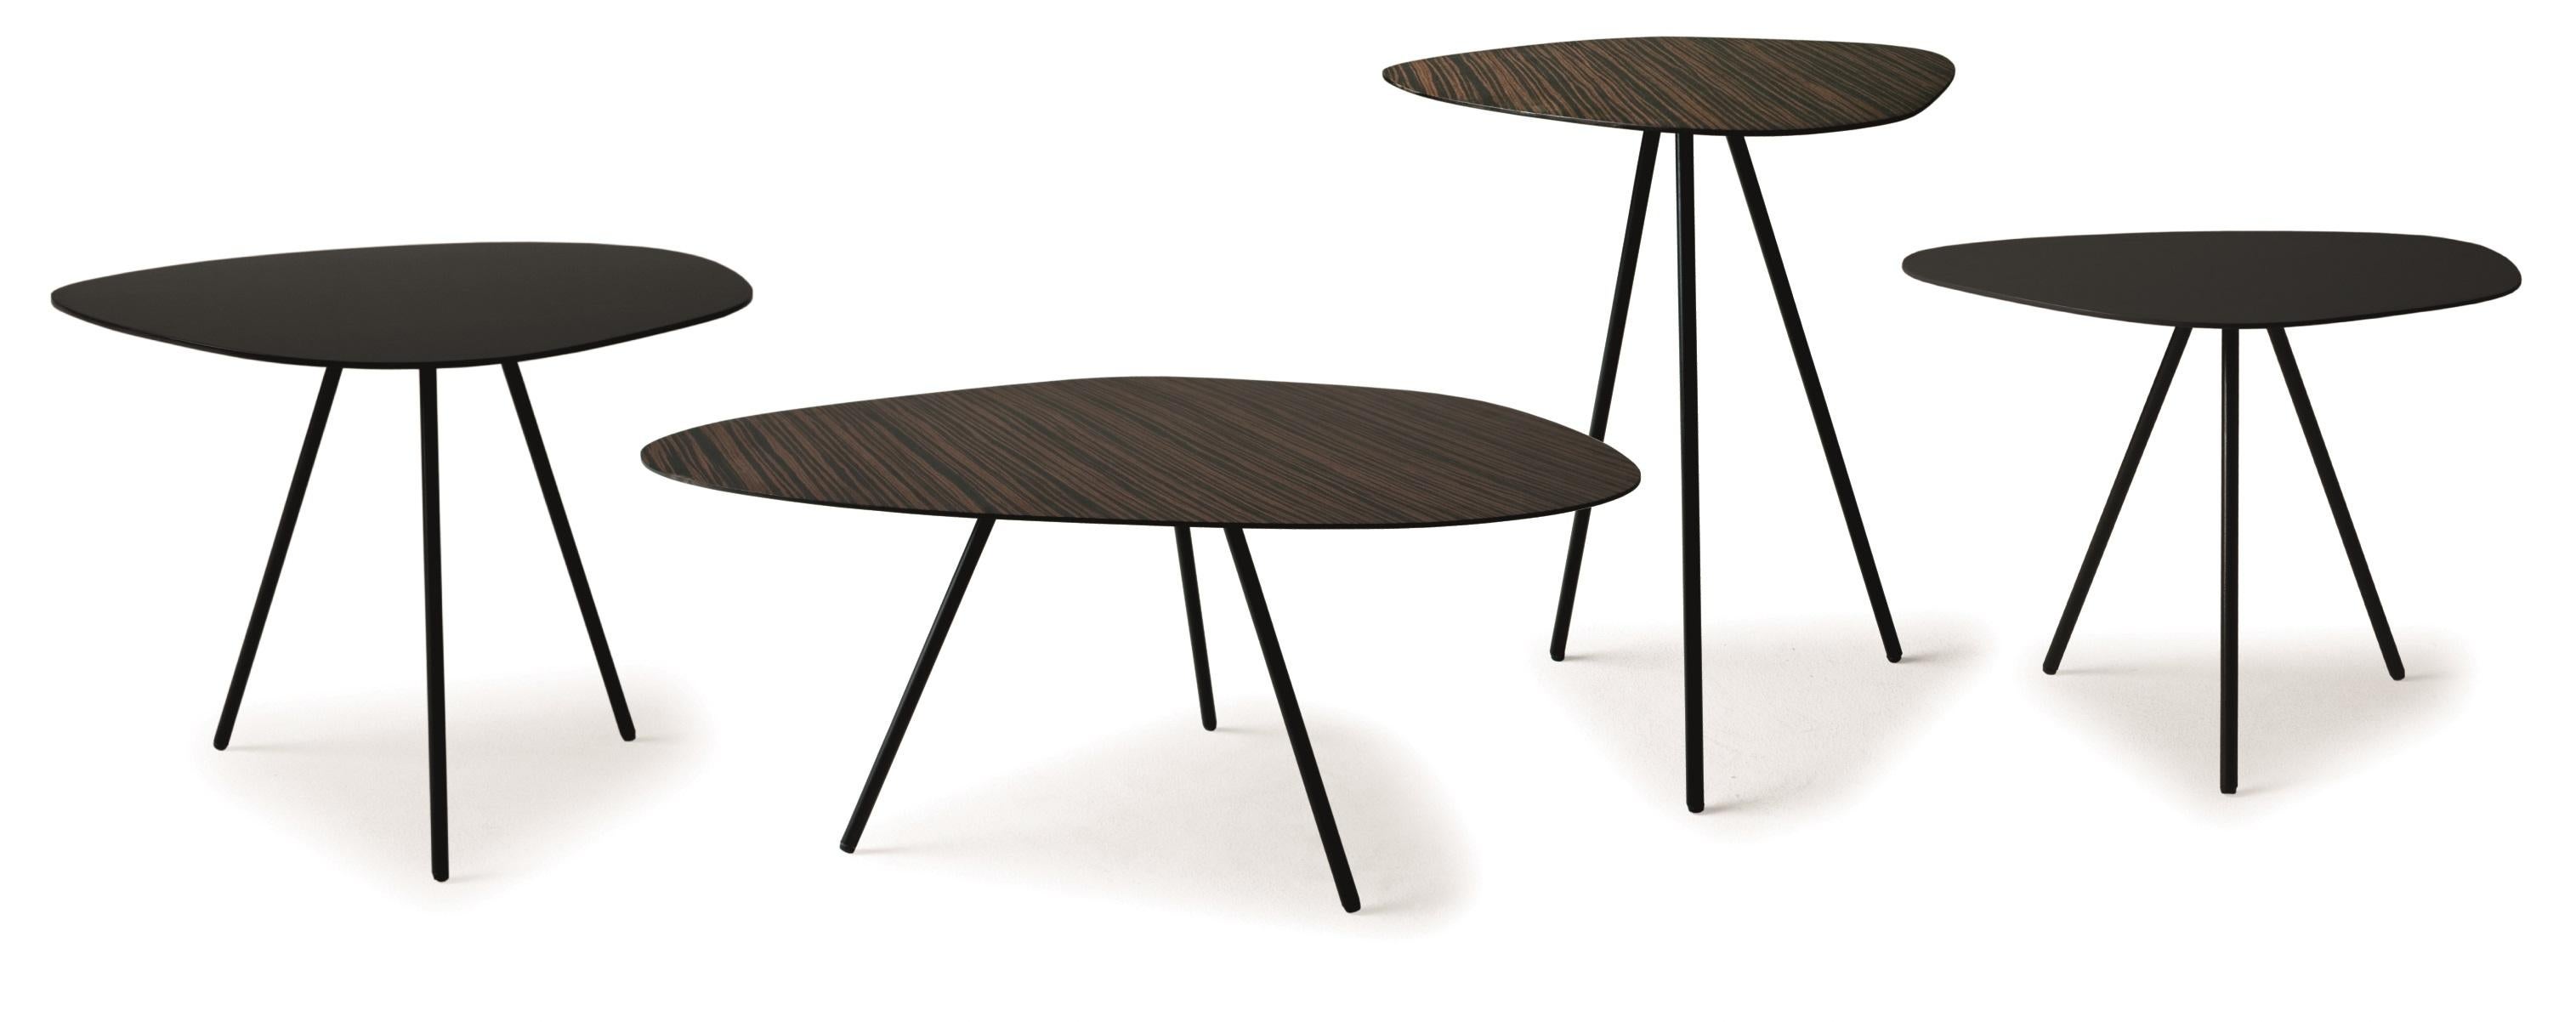 Steel high outdoor pebble end table by Kenneth Cobonpue.
Materials: Steel. 
Also available in other colors and for indoors.
Dimensions: 36 cm x 47 cm x H 50 cm 

Pebble playfully echoes shapes found in nature like stepping-stones in a riverbed